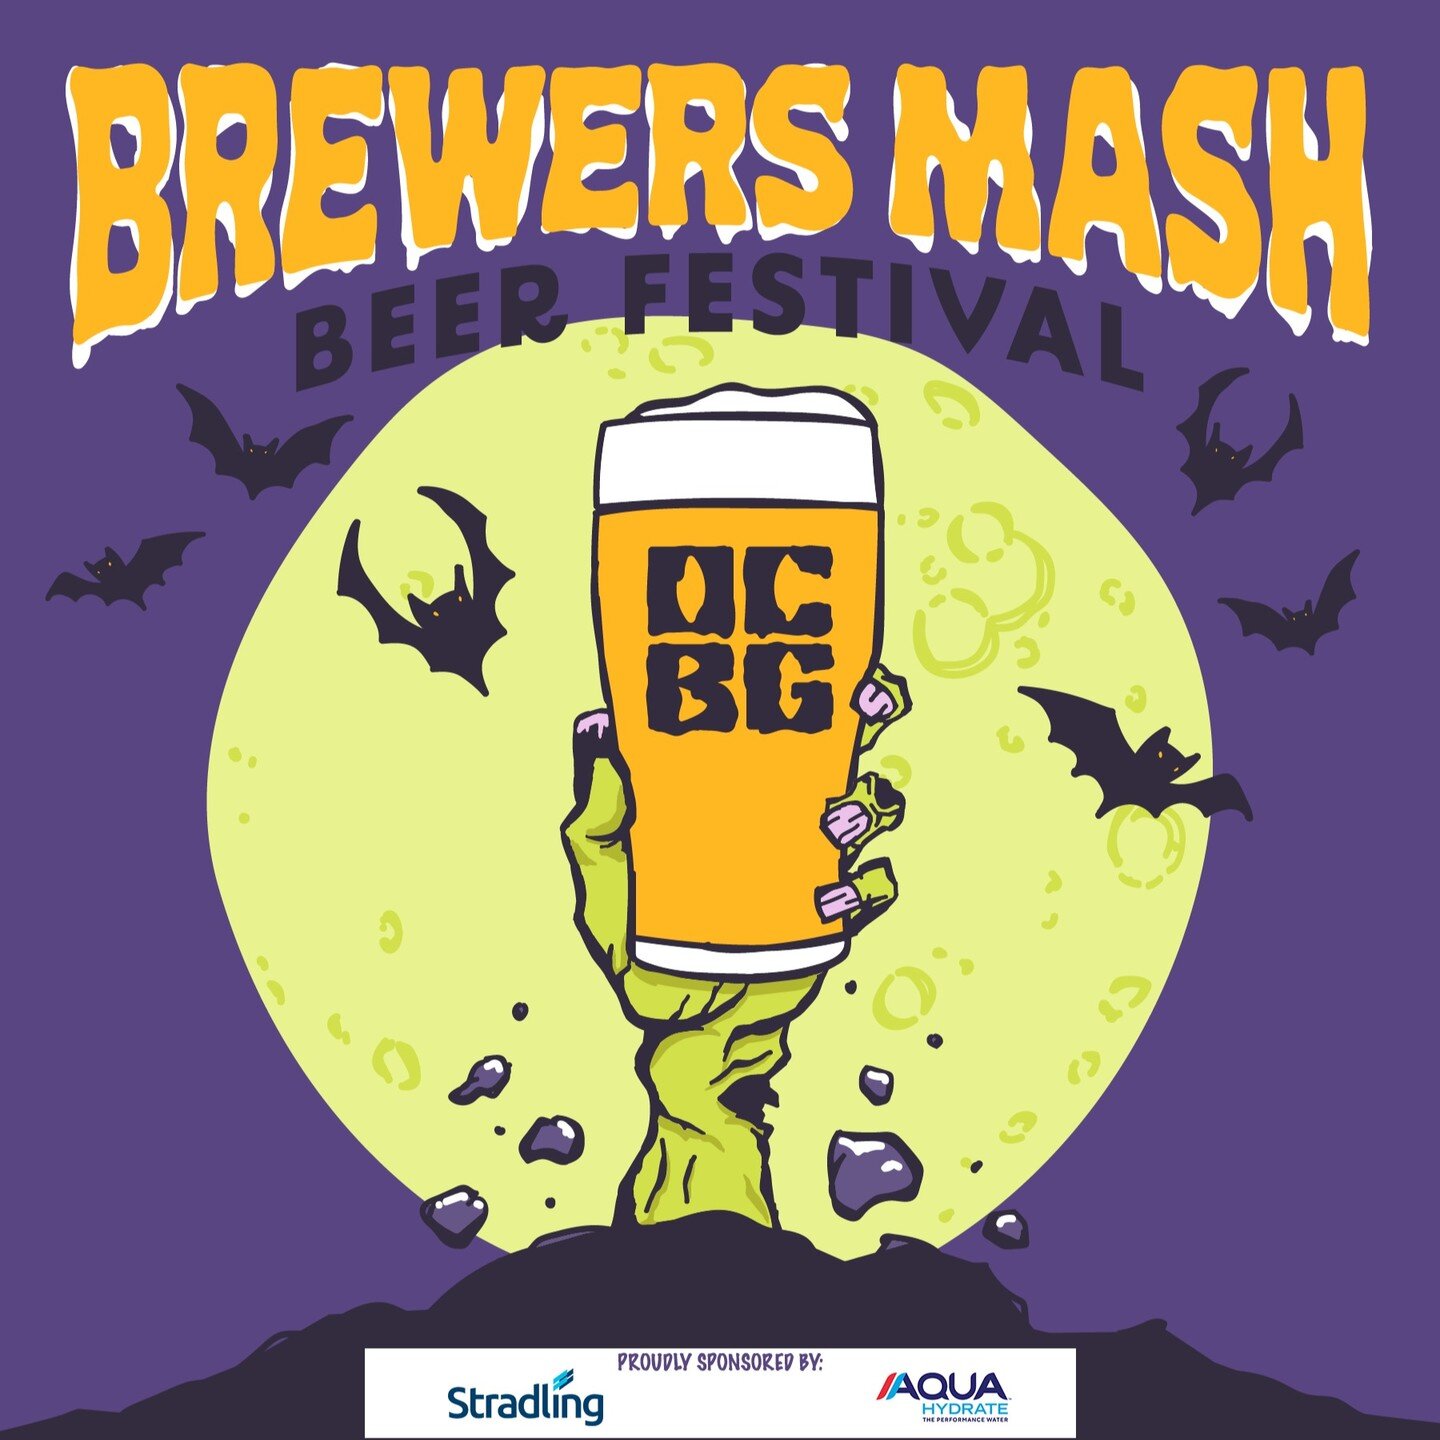 🍻🚀 Just 2 DAYS left until Brewers Mash 2023! 🎃 This is your chance to enjoy unlimited craft beer from top local breweries, incredible food, live entertainment, and unforgettable Halloween vibes! Don't miss out - grab your tickets now!

Featuring b